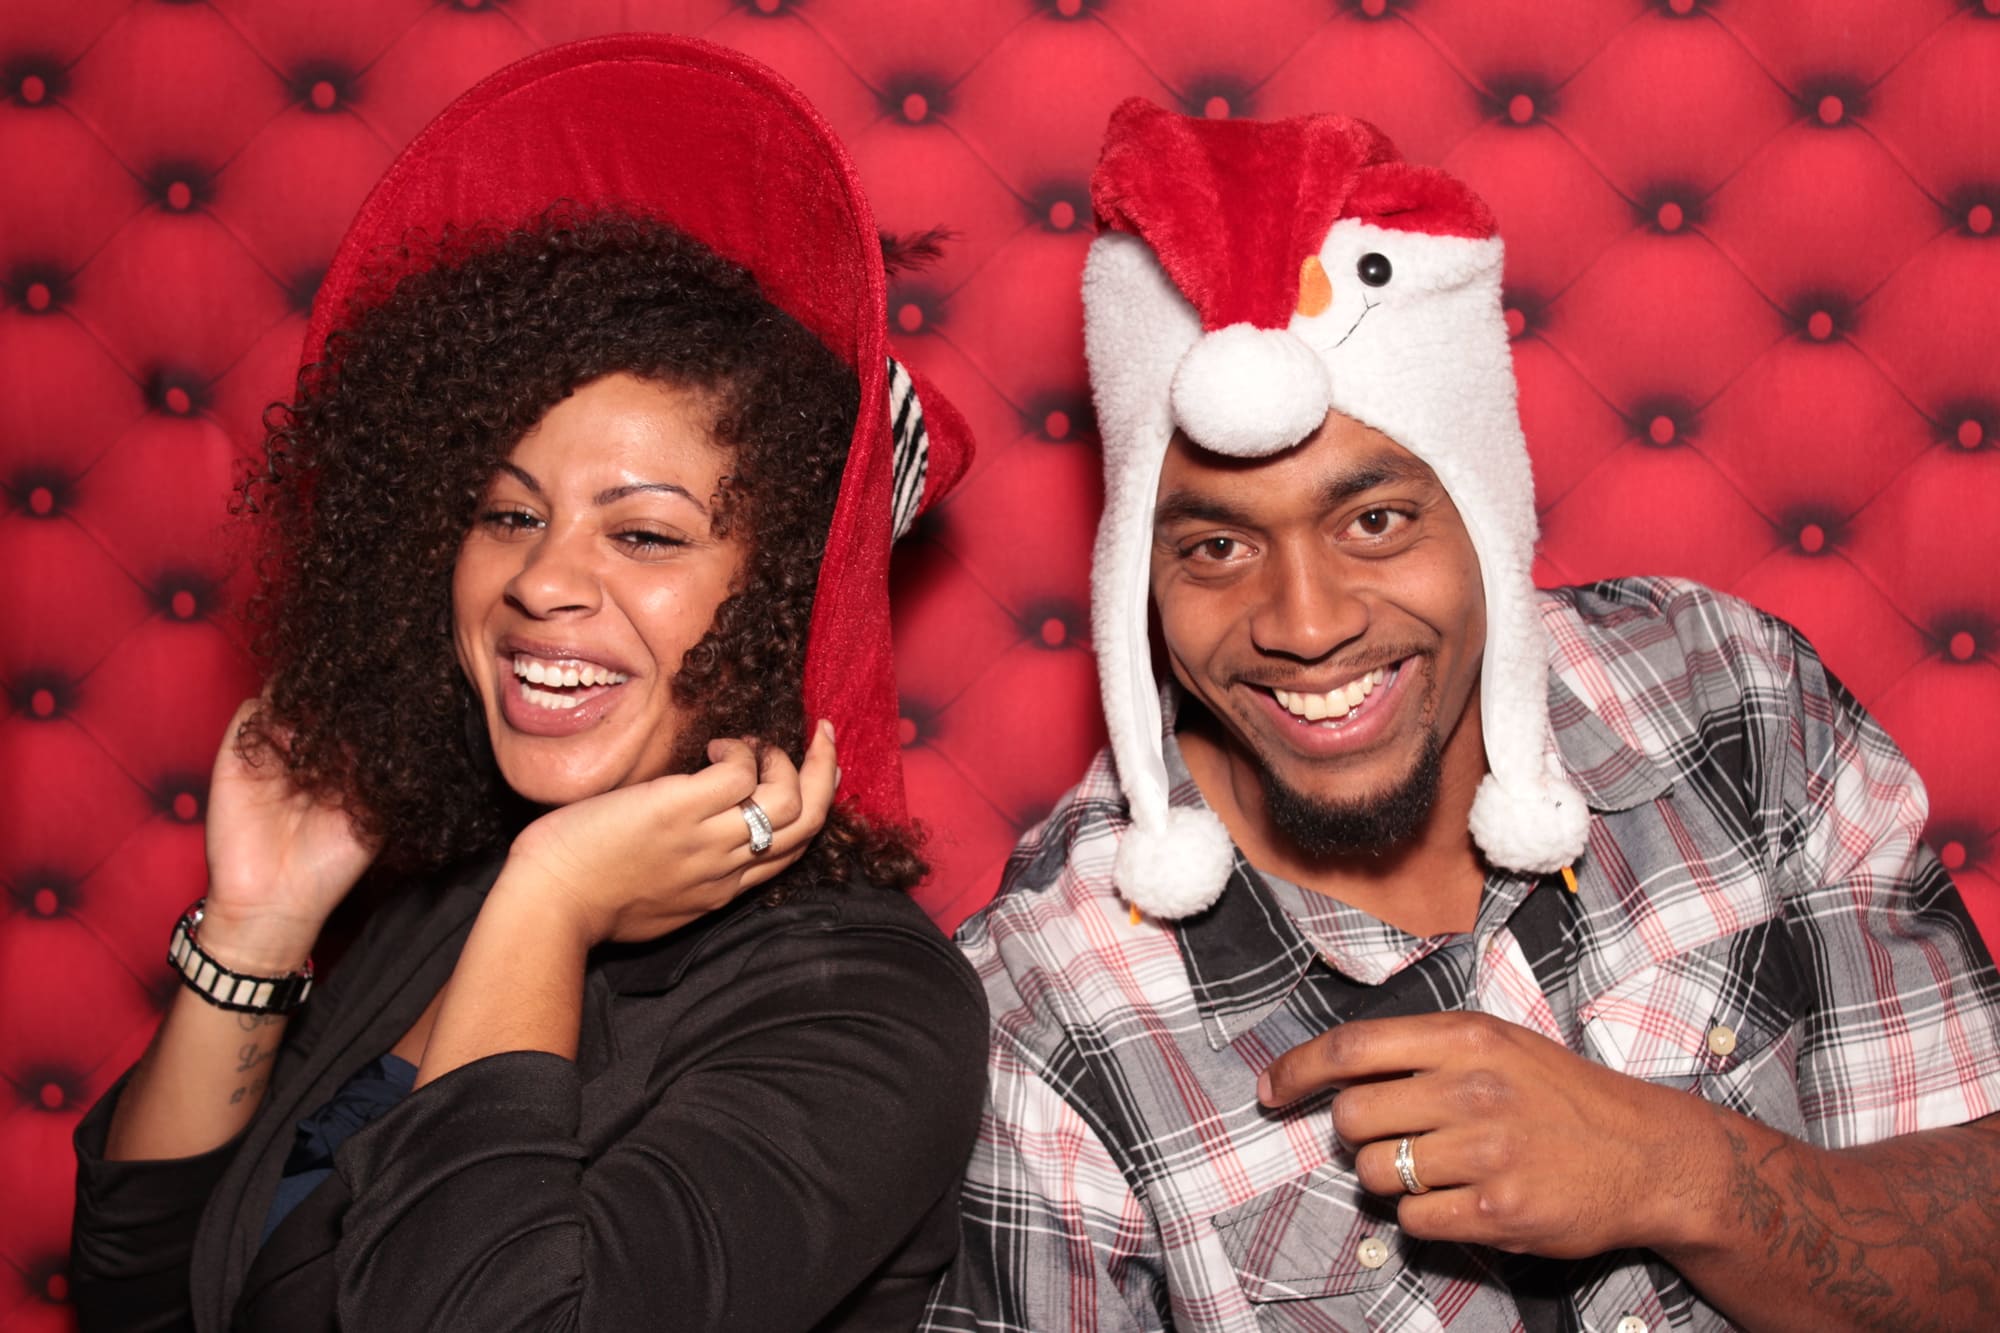 Holiday-PartyPhotobooth-Rental-Company-Corporate-No. 1-Backdrops-Photography-LGBT-Professional-Quality